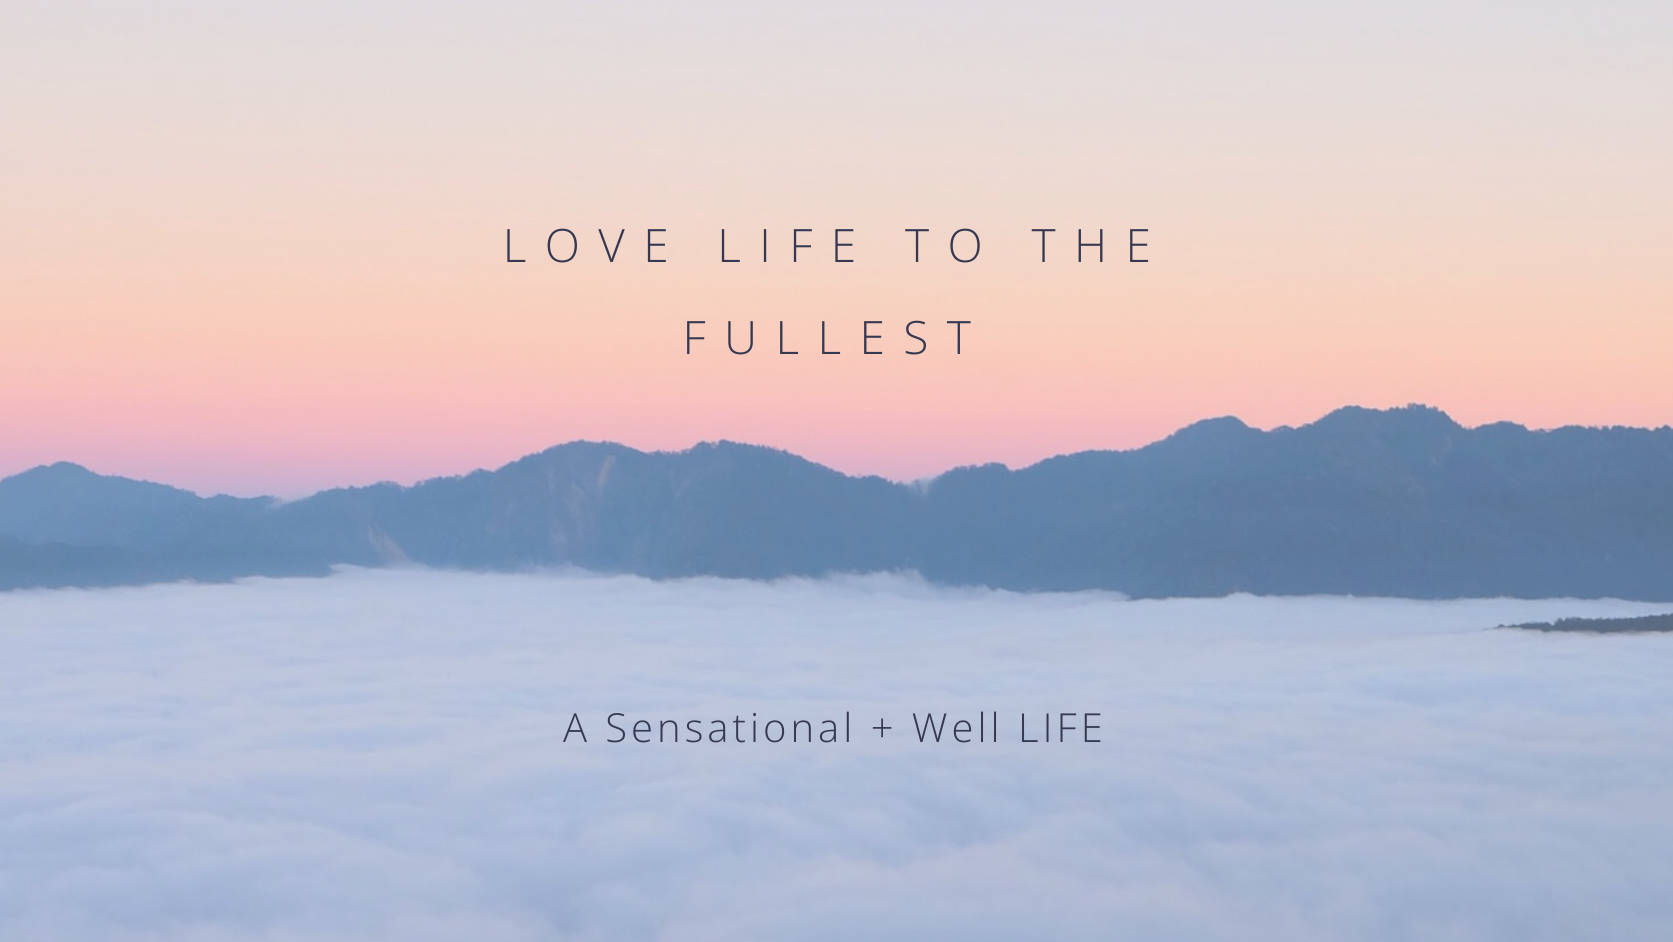 Love life to the fullest - a Sensational + Well life